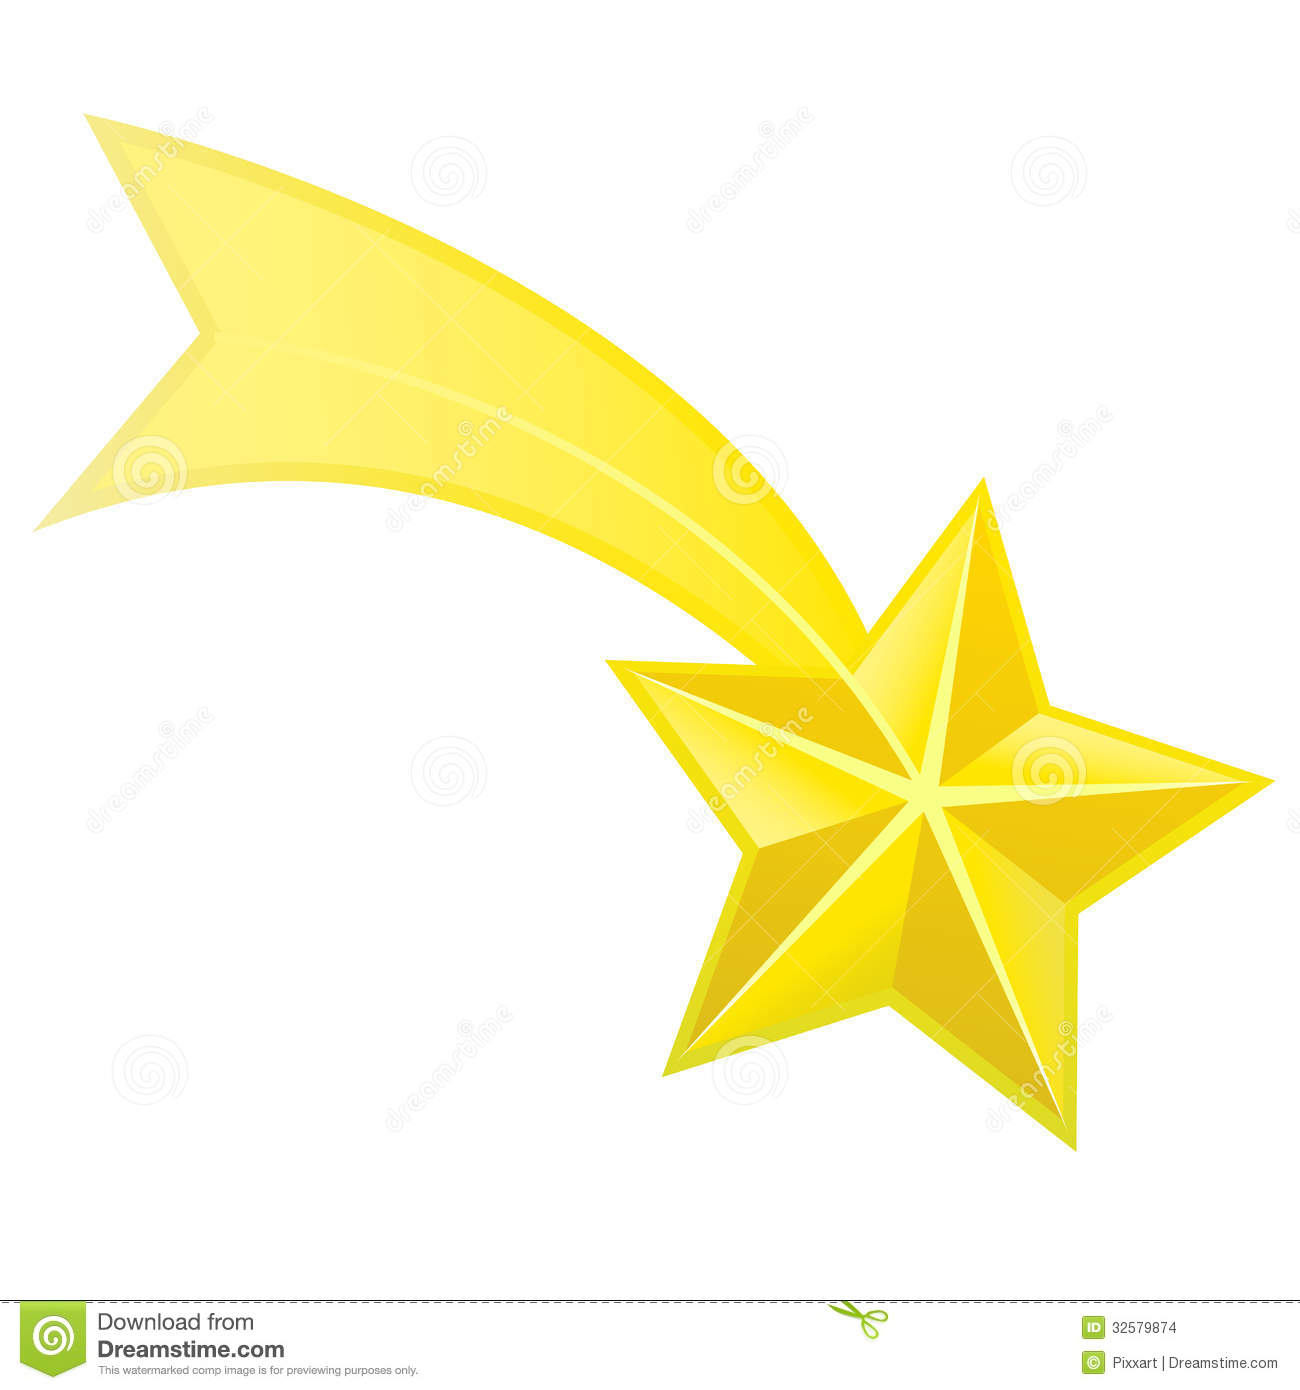 Shooting Star Stock Images   Image  32579874